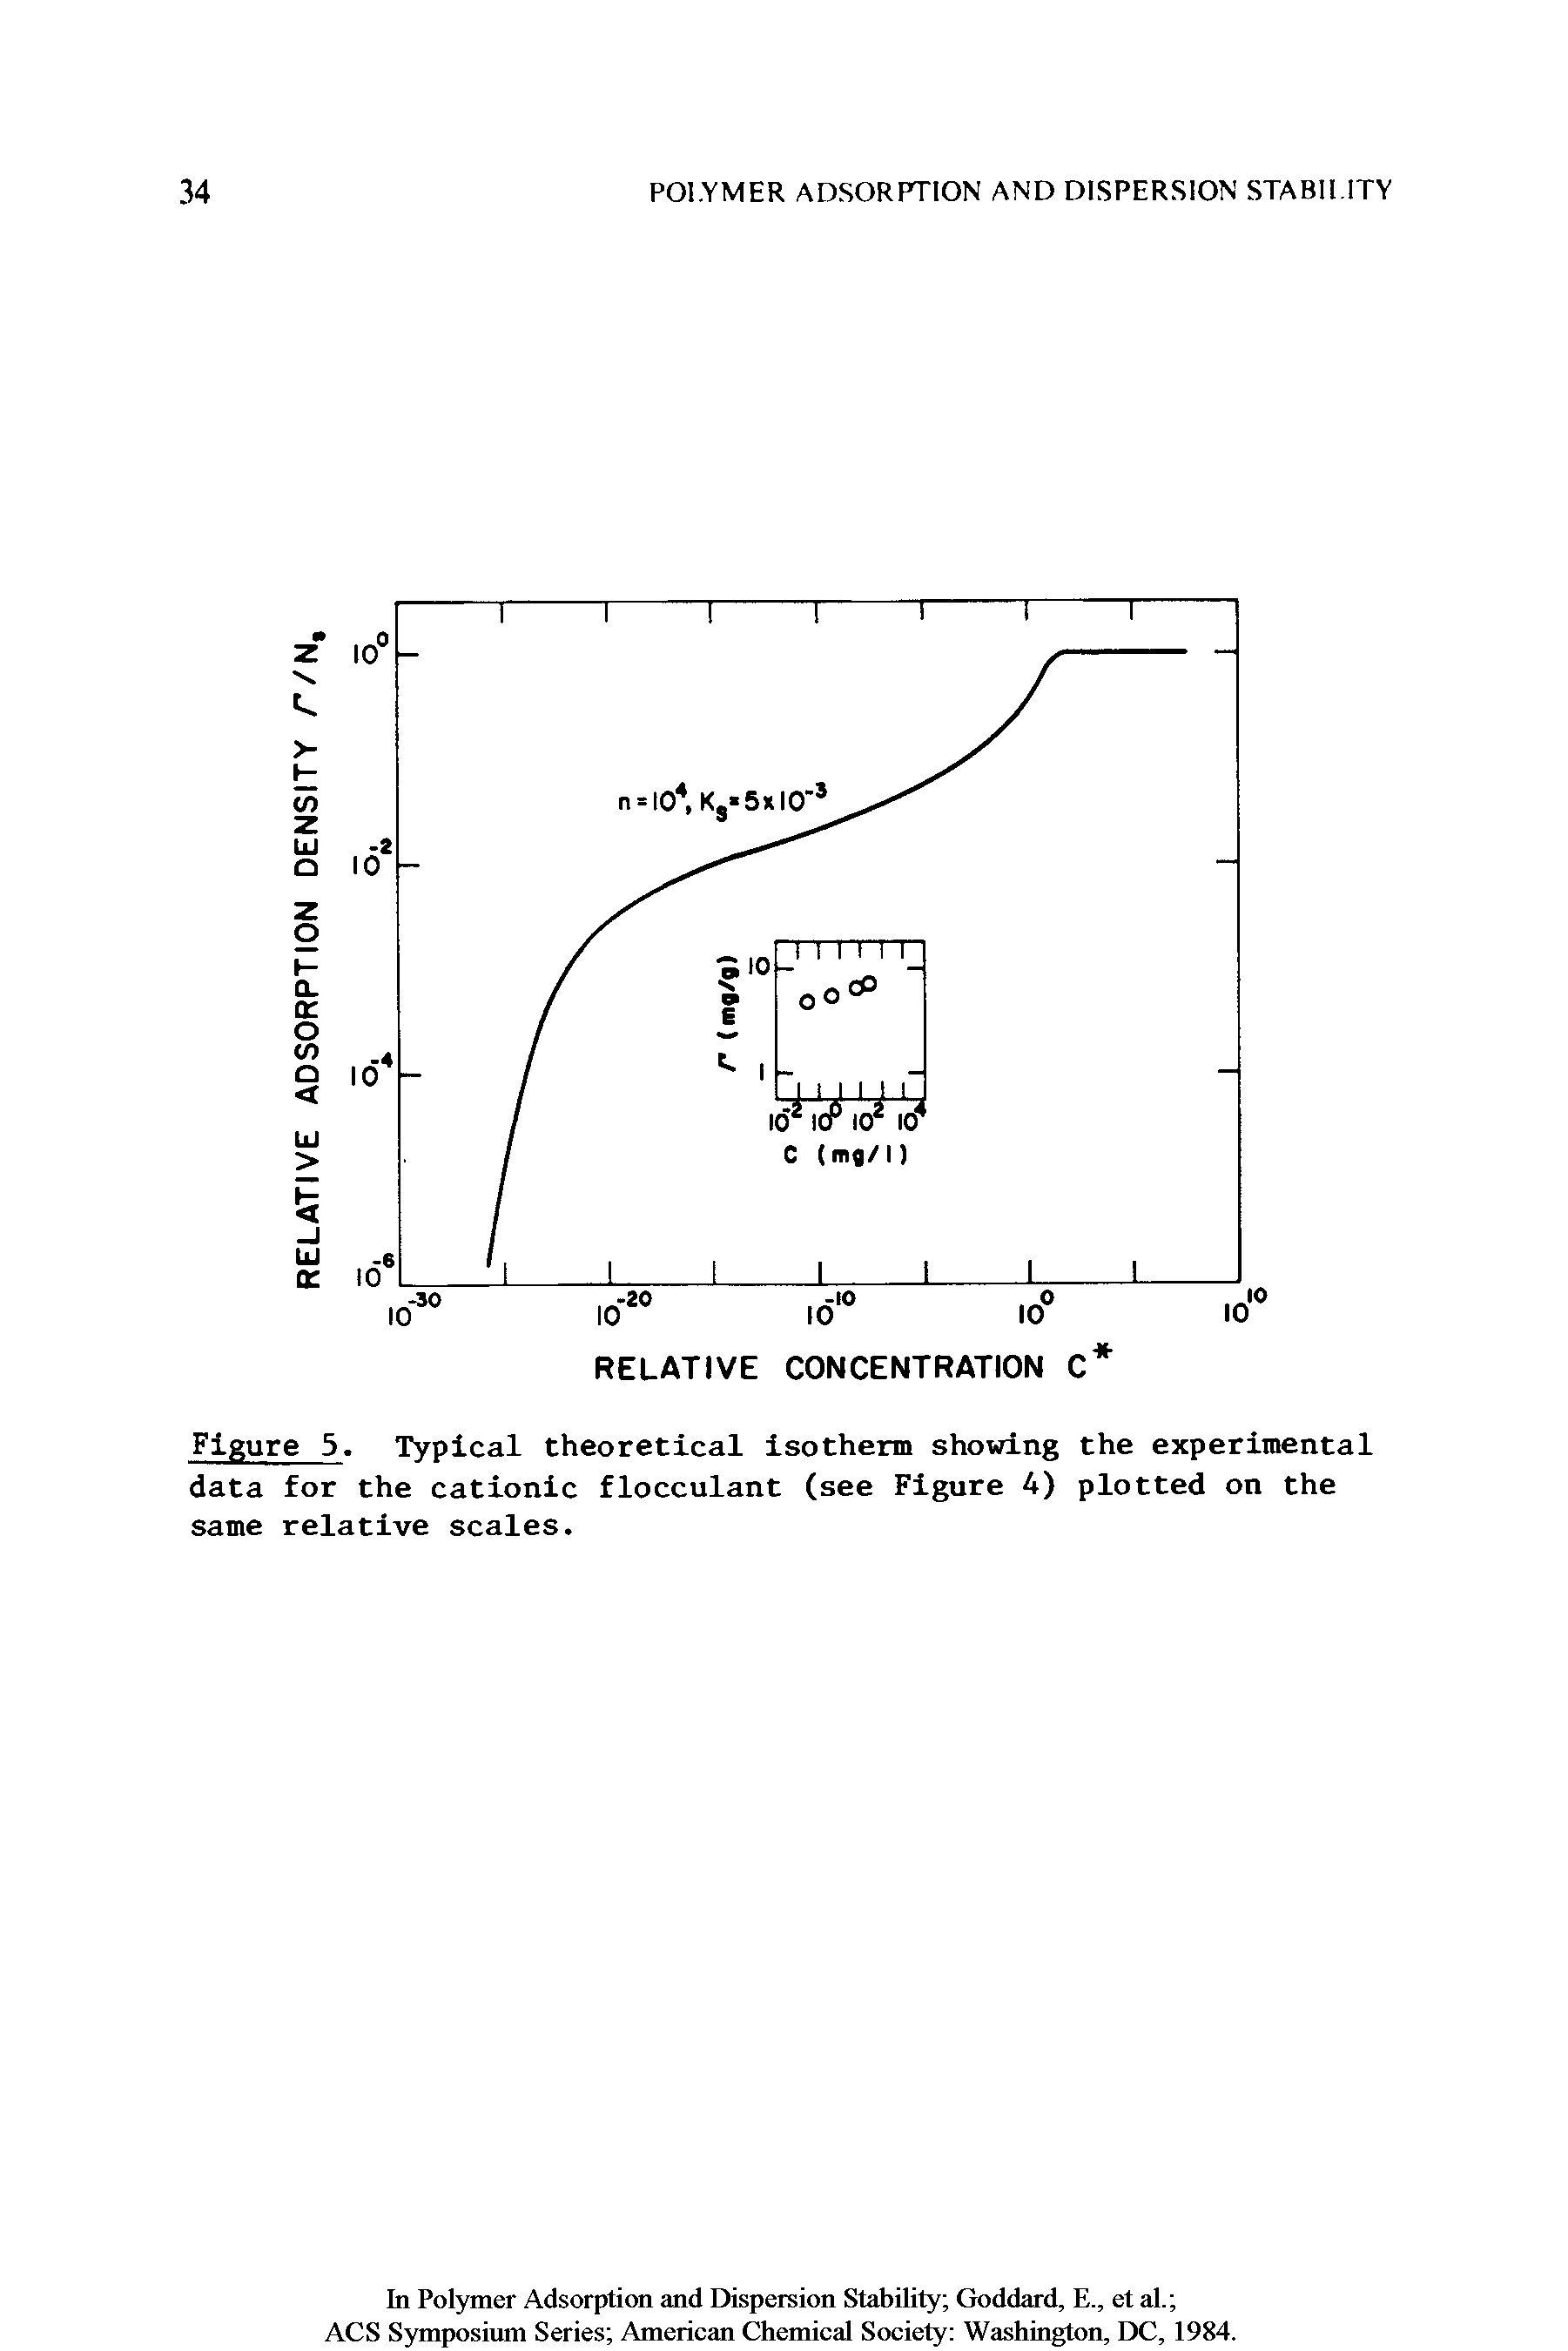 Figure 5. Typical theoretical isotherm showing the experimental data for the cationic flocculant (see Figure 4) plotted on the same relative scales.